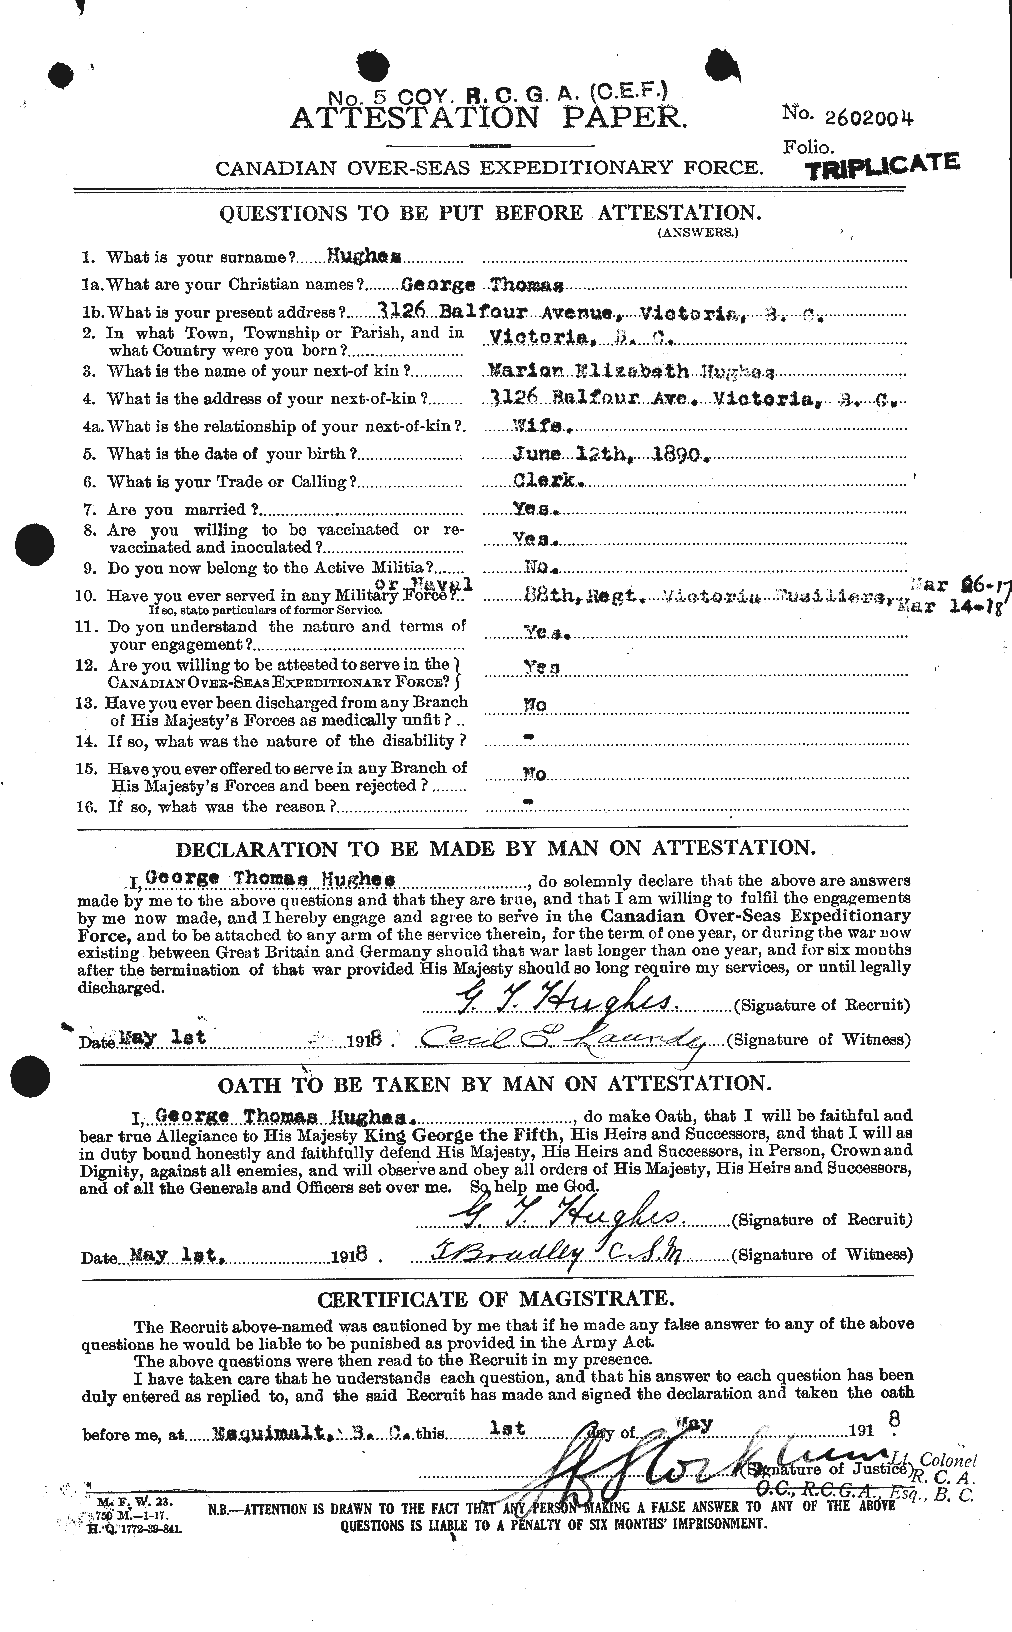 Personnel Records of the First World War - CEF 403837a